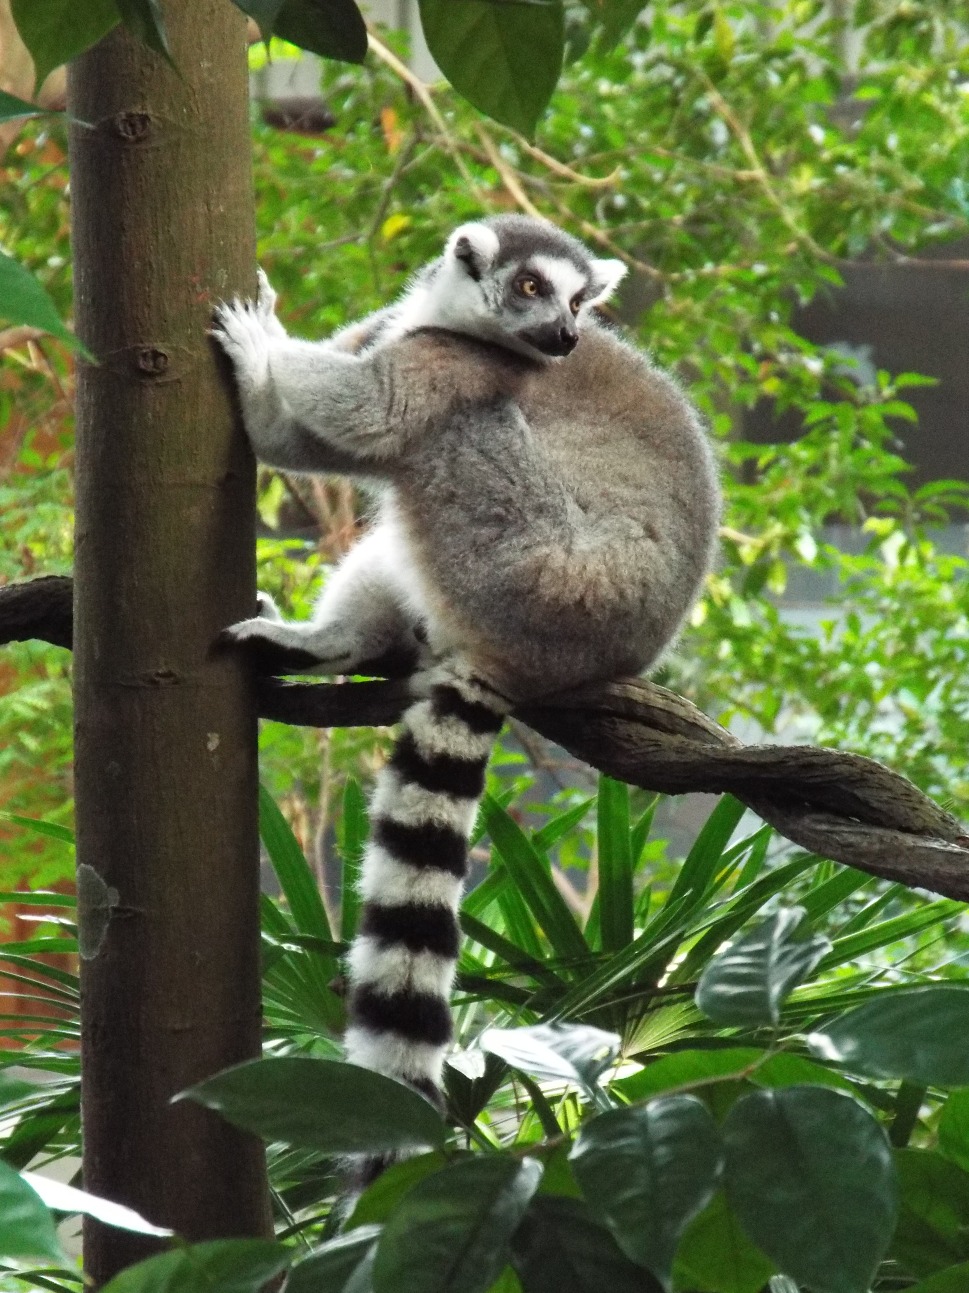 Raccoon, Animal | Fur | Furry | Striped | Nature | Tree | Leaf | Leaves | Green | Face | Tail